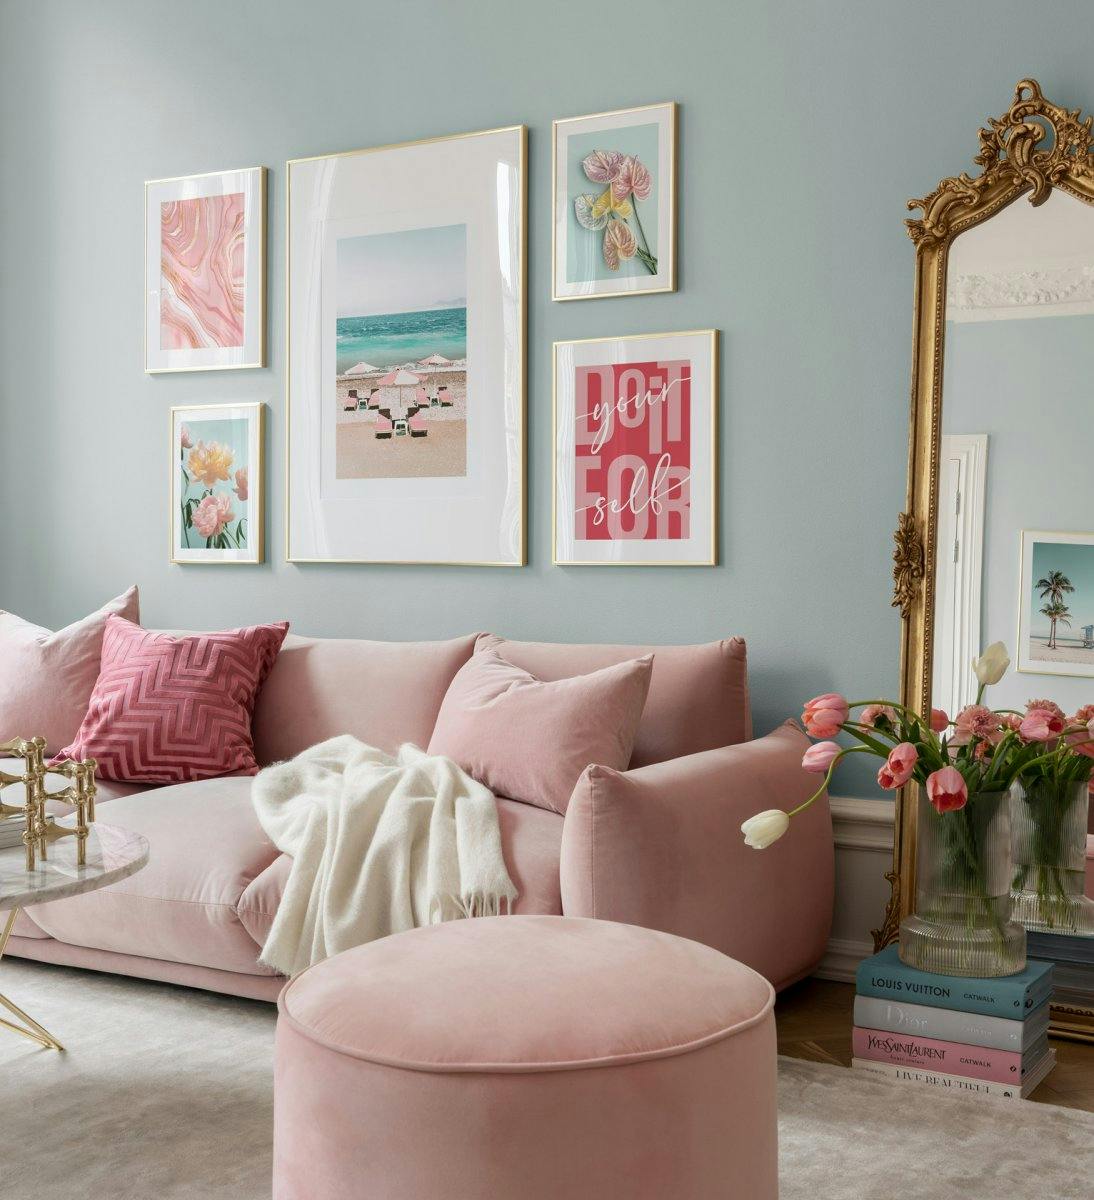 Playful photography and quote prints in bright pastel colors create a room that radiates trendiness